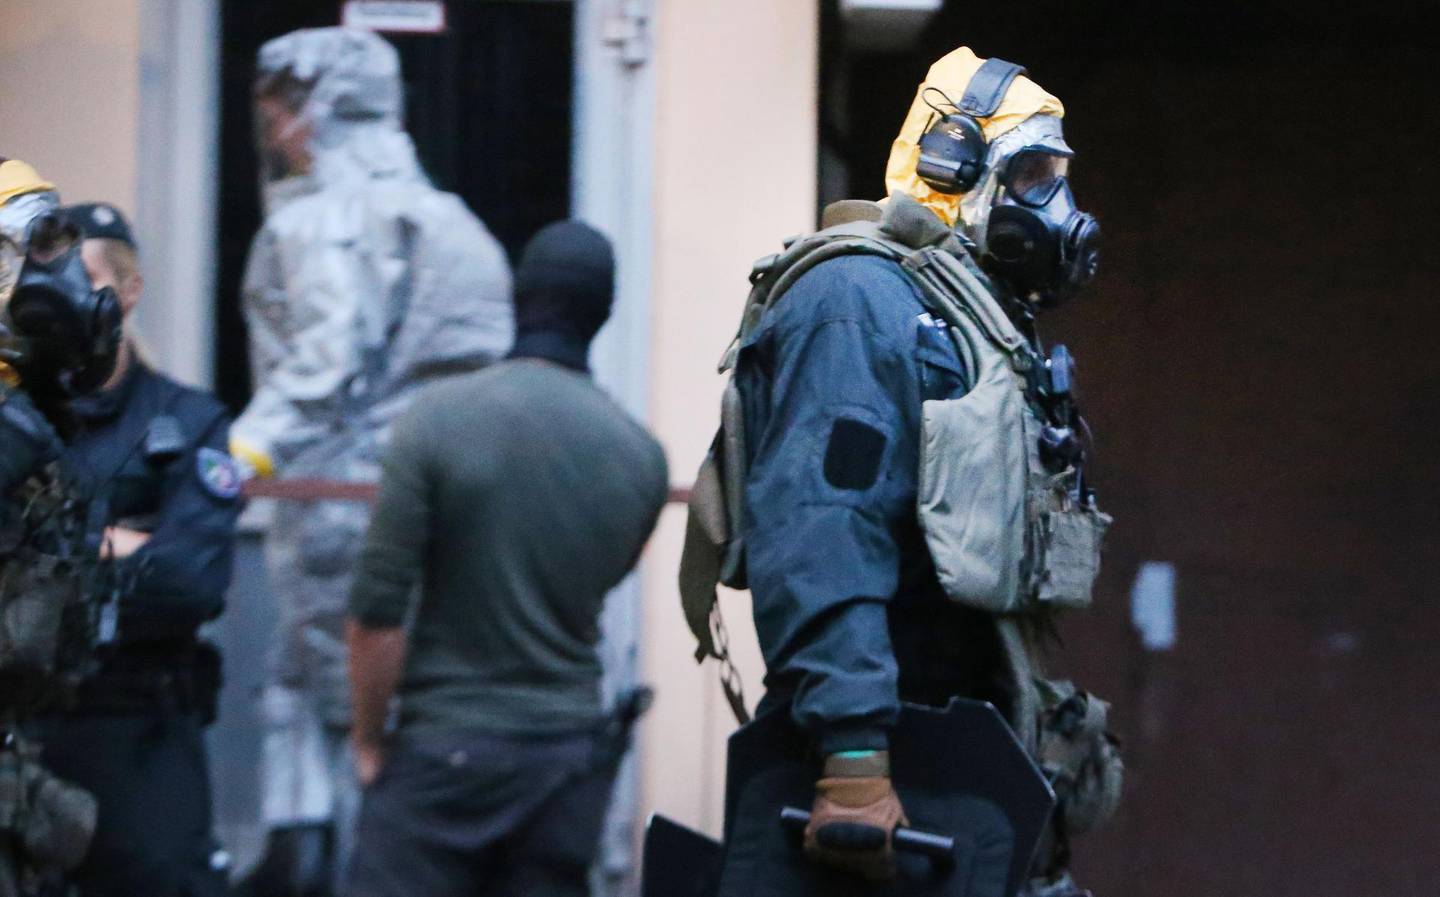 Picture taken on June 12, 2018 shows police officers of a special unit wearing protective clothes and respiratory masks during an operation in Cologne's Chorweiler district, western Germany, where police found toxic substances after storming a flat. A Tunisian man arrested in Germany is suspected of trying to build a biological weapon using the deadly poison ricin, prosecutors said on June 14, 2018, stressing however there was no indication of any "concrete attack plans". - Germany OUT
 / AFP / dpa / David Young
